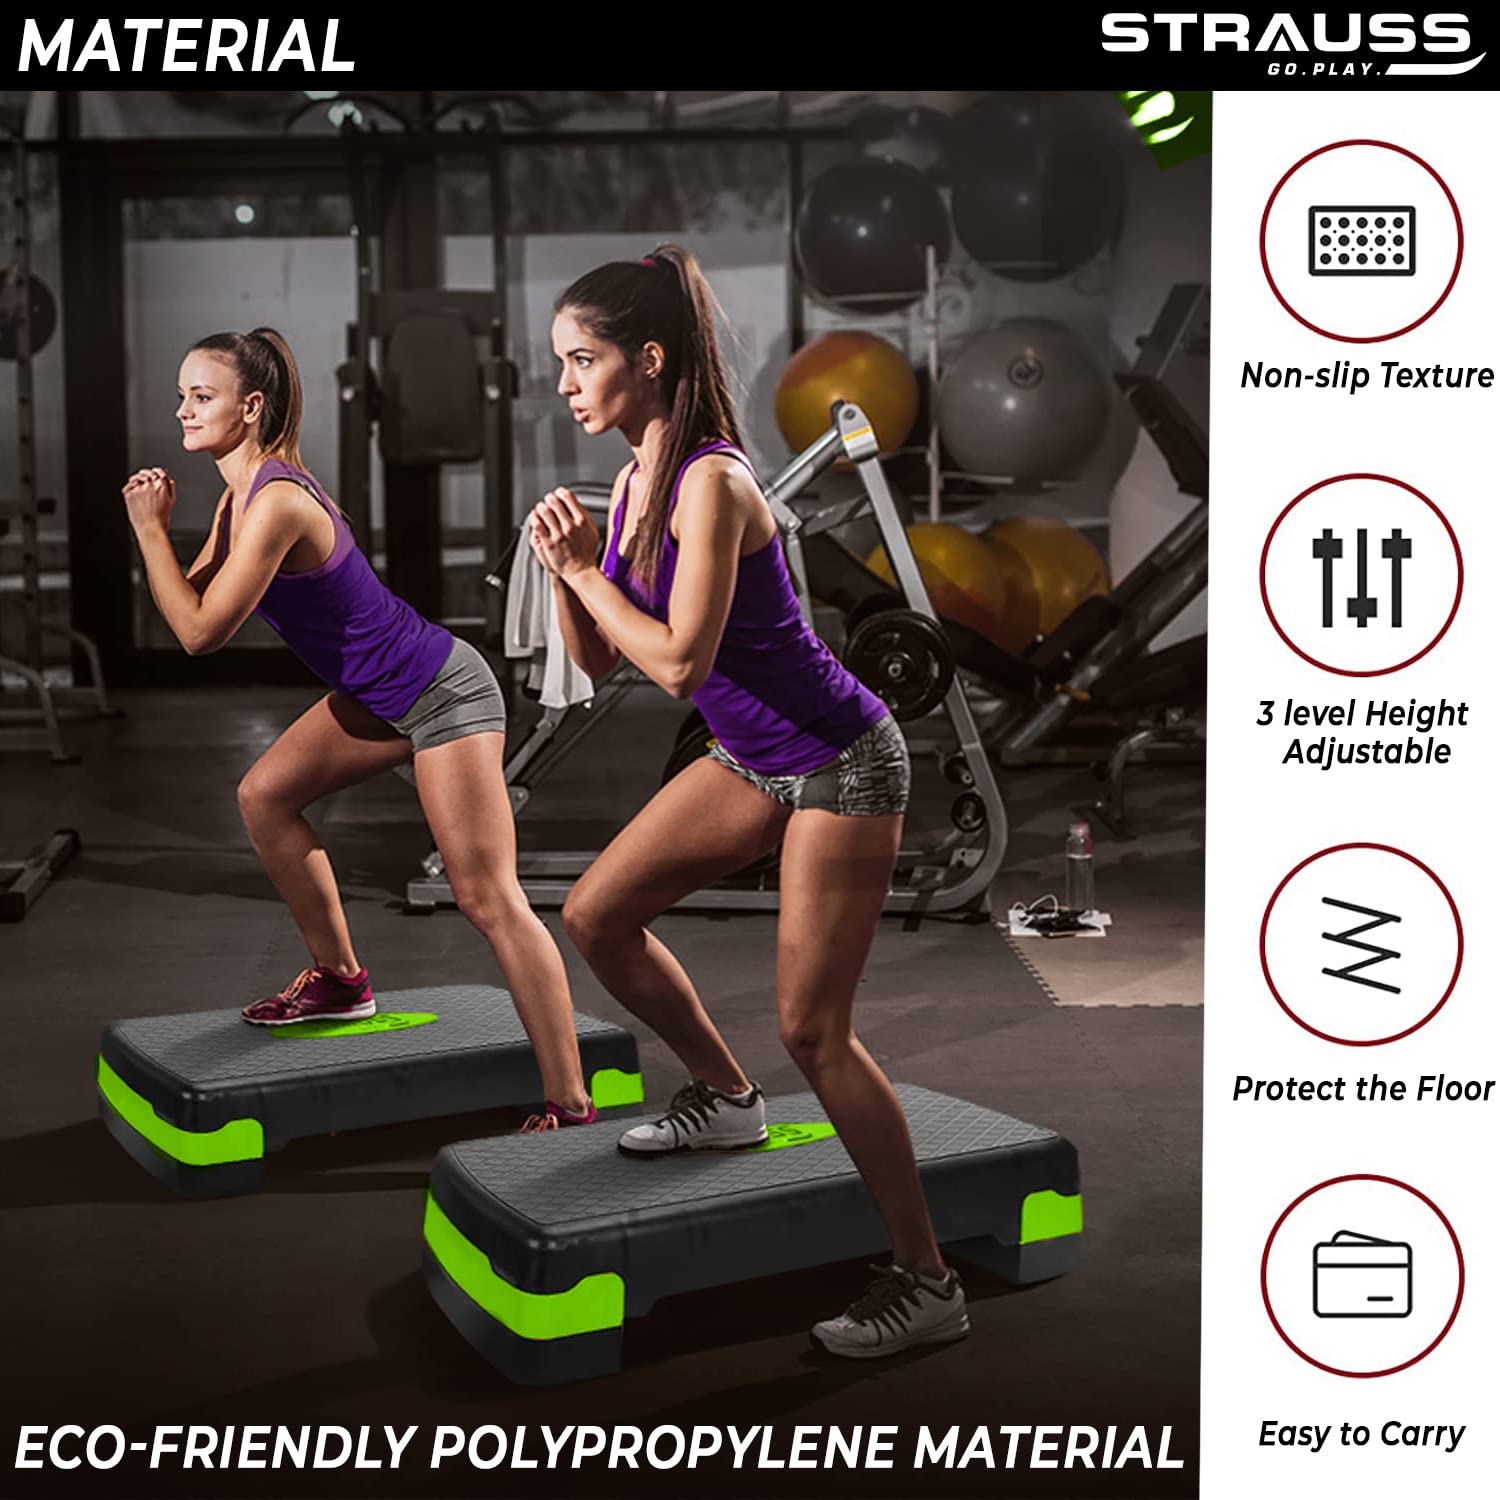 Strauss Aerobic Stepper | Two Height Level Adjustments - 4 inches and 6 inches | Ideal For Cardio Workout, Lower Body Toning and Calorie Burning | Slip-Resistant & Shock Absorbing Platform for Extra-Durability - Supports Upto 200 KG, (Green)